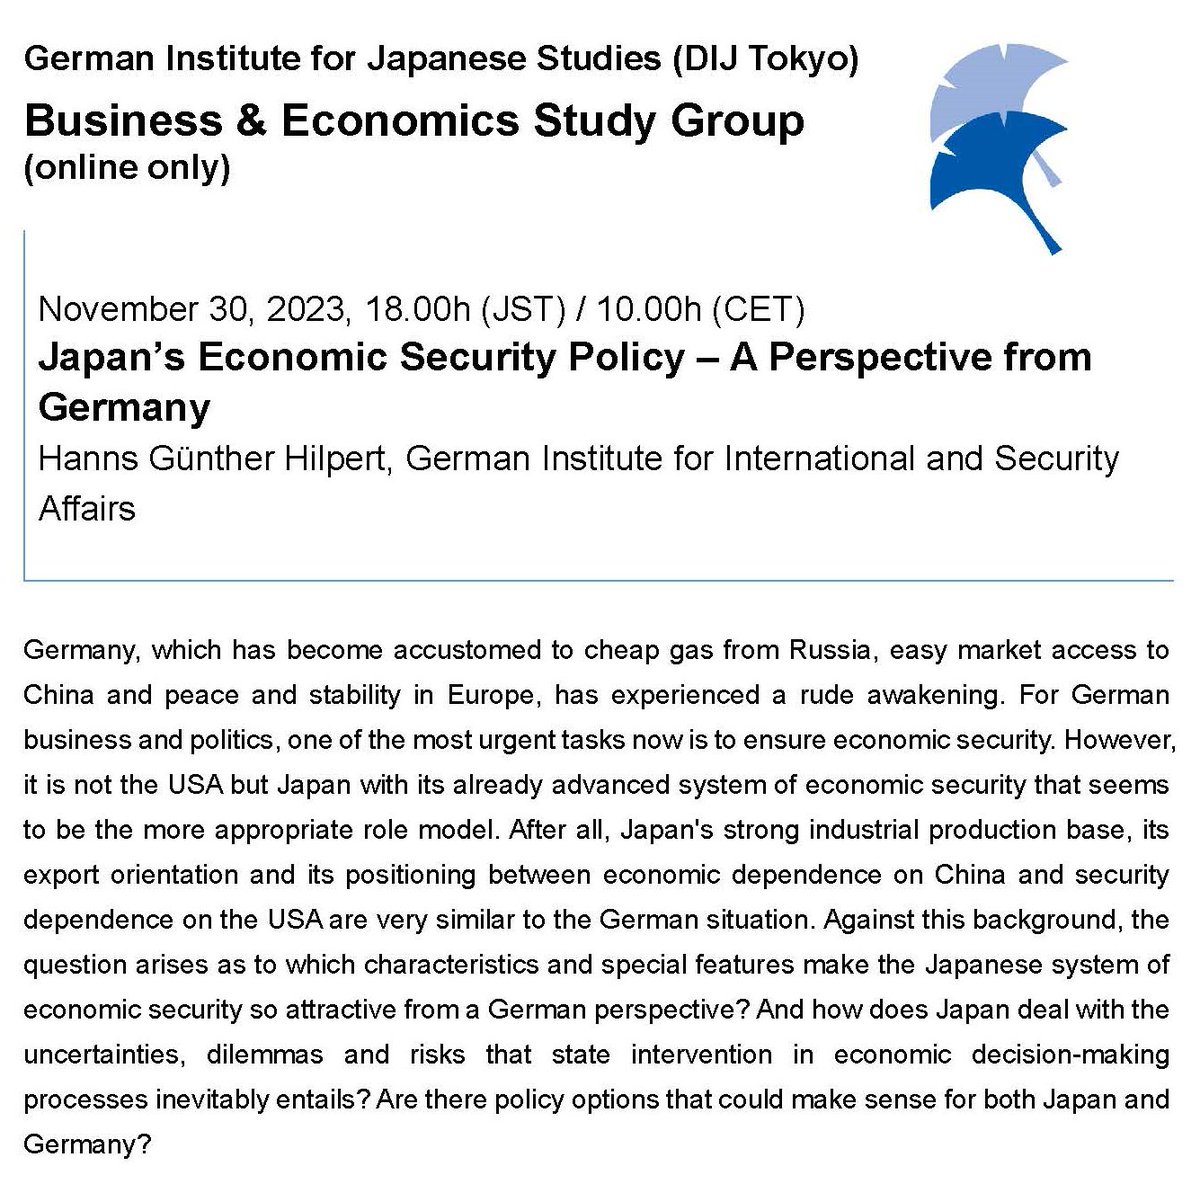 REMINDER You can still register for tomorrow's online #DIJStudyGroup session with Hanns Günther Hilpert who will discuss "Japan’s Economic Security Policy – A Perspective from Germany". Thu, 30 Nov, 18.00 JST / 10.00 CET 